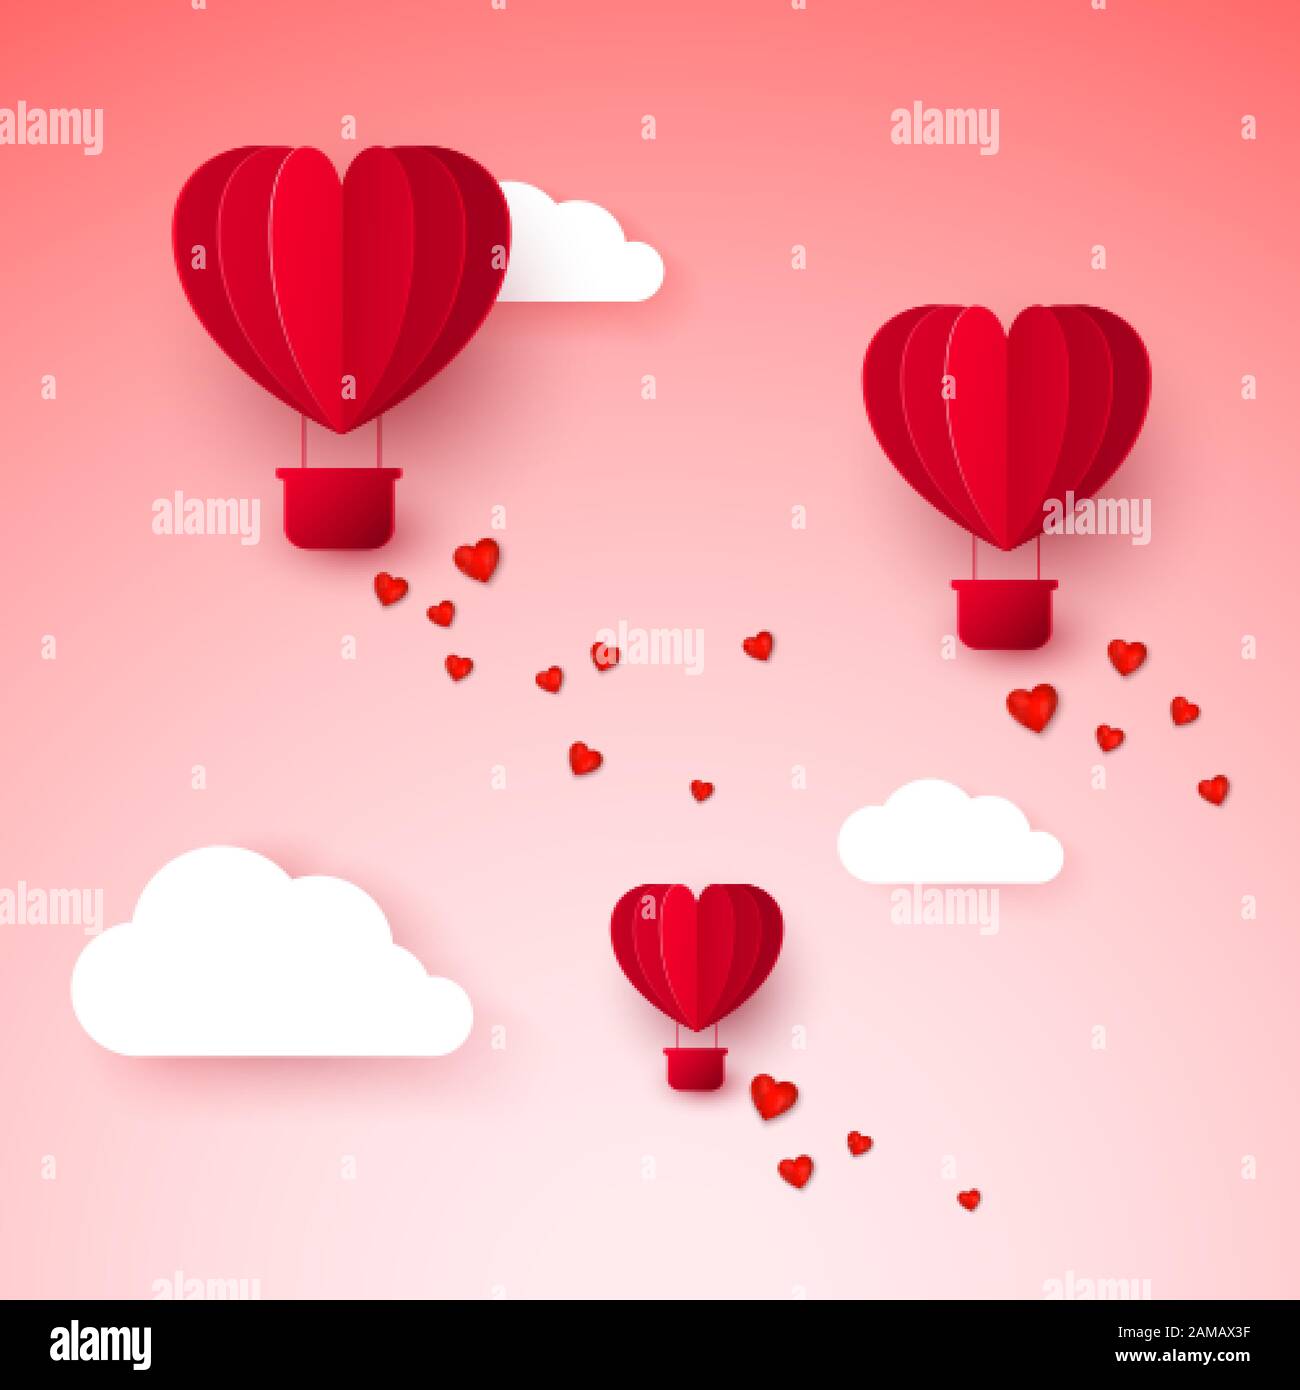 10x8ft Valentines Backdrop Cartoon Hearts Hot Air Balloon Cloud Pink Pastel Photography Backgroud Love Theme Romantic Wedding Anniversary Lover Party Couple Dating Photo Props 